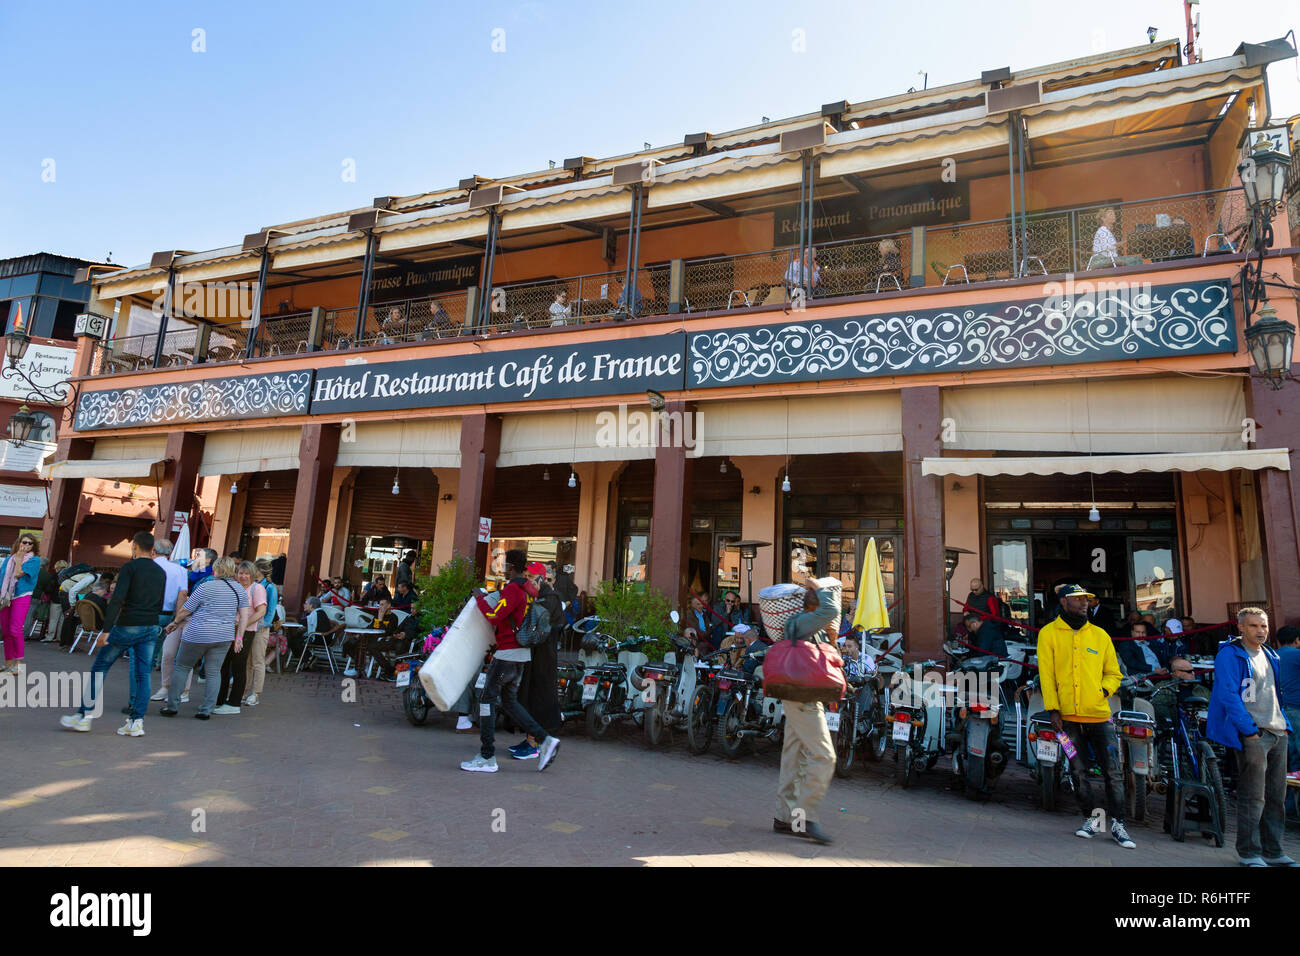 Cafe de France restaurant and Hotel, Djemaa el Fna Square, Marrakech, Morocco North Africa Stock Photo